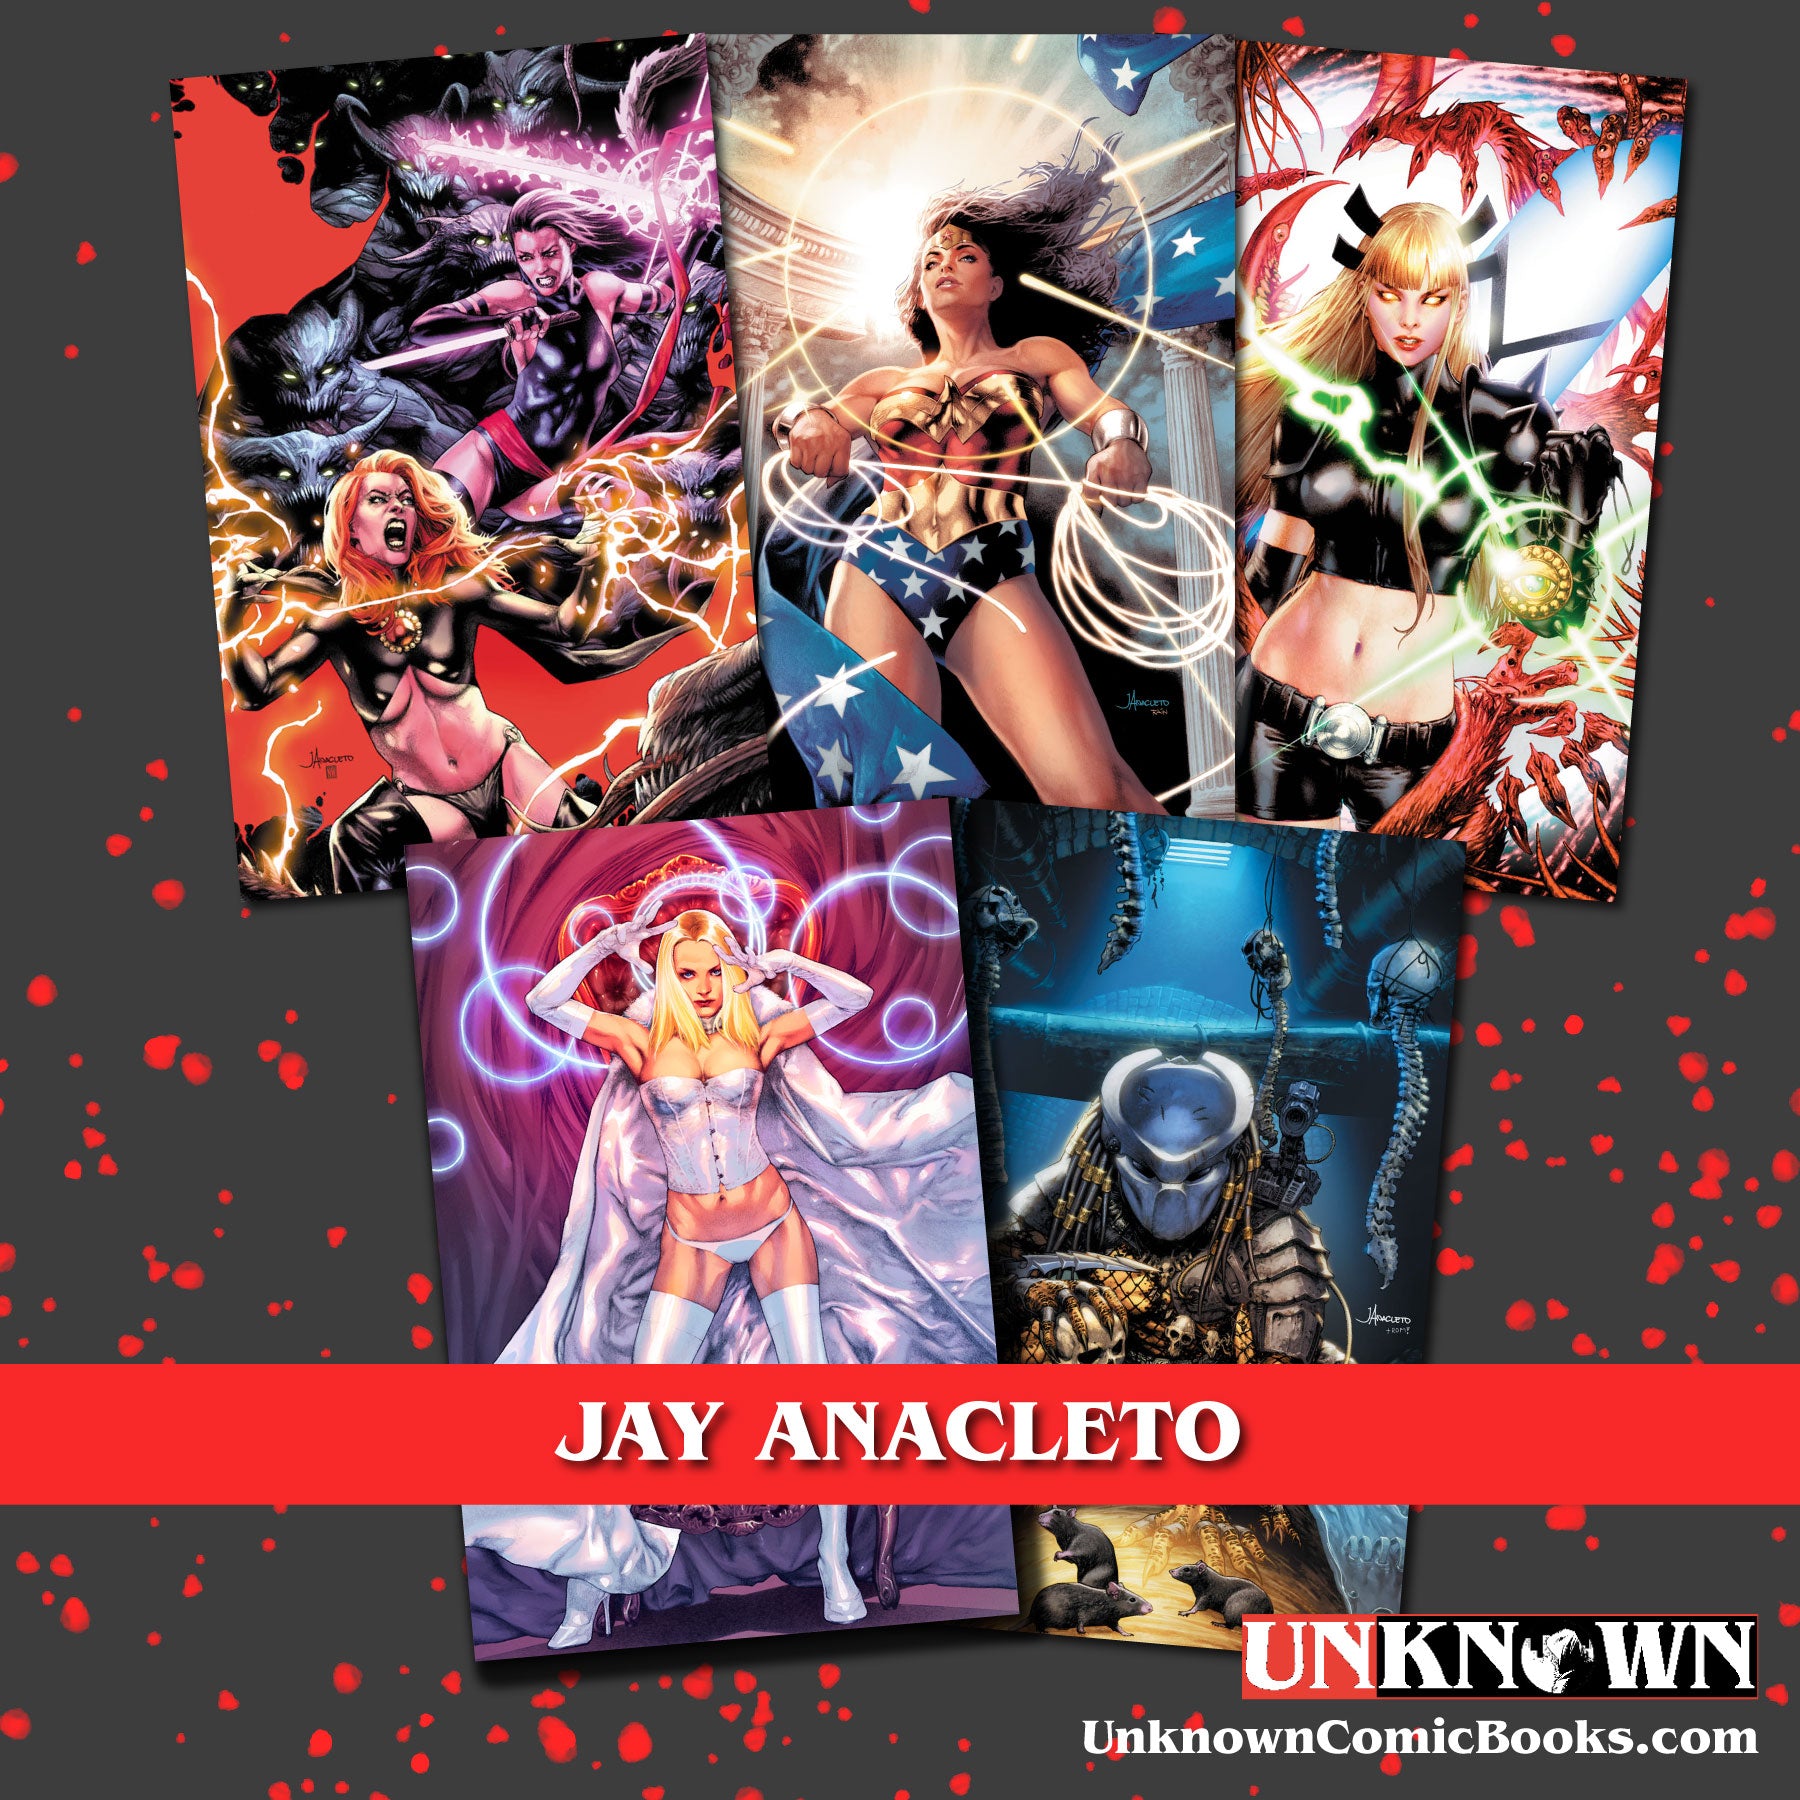 [5 PACK] UNKNOWN COMICS MYSTERY THEMED 👉🎨JAY ANACLETO ARTIST EXCLUSIVE BOX 👉VIRGIN (12/21/2022)